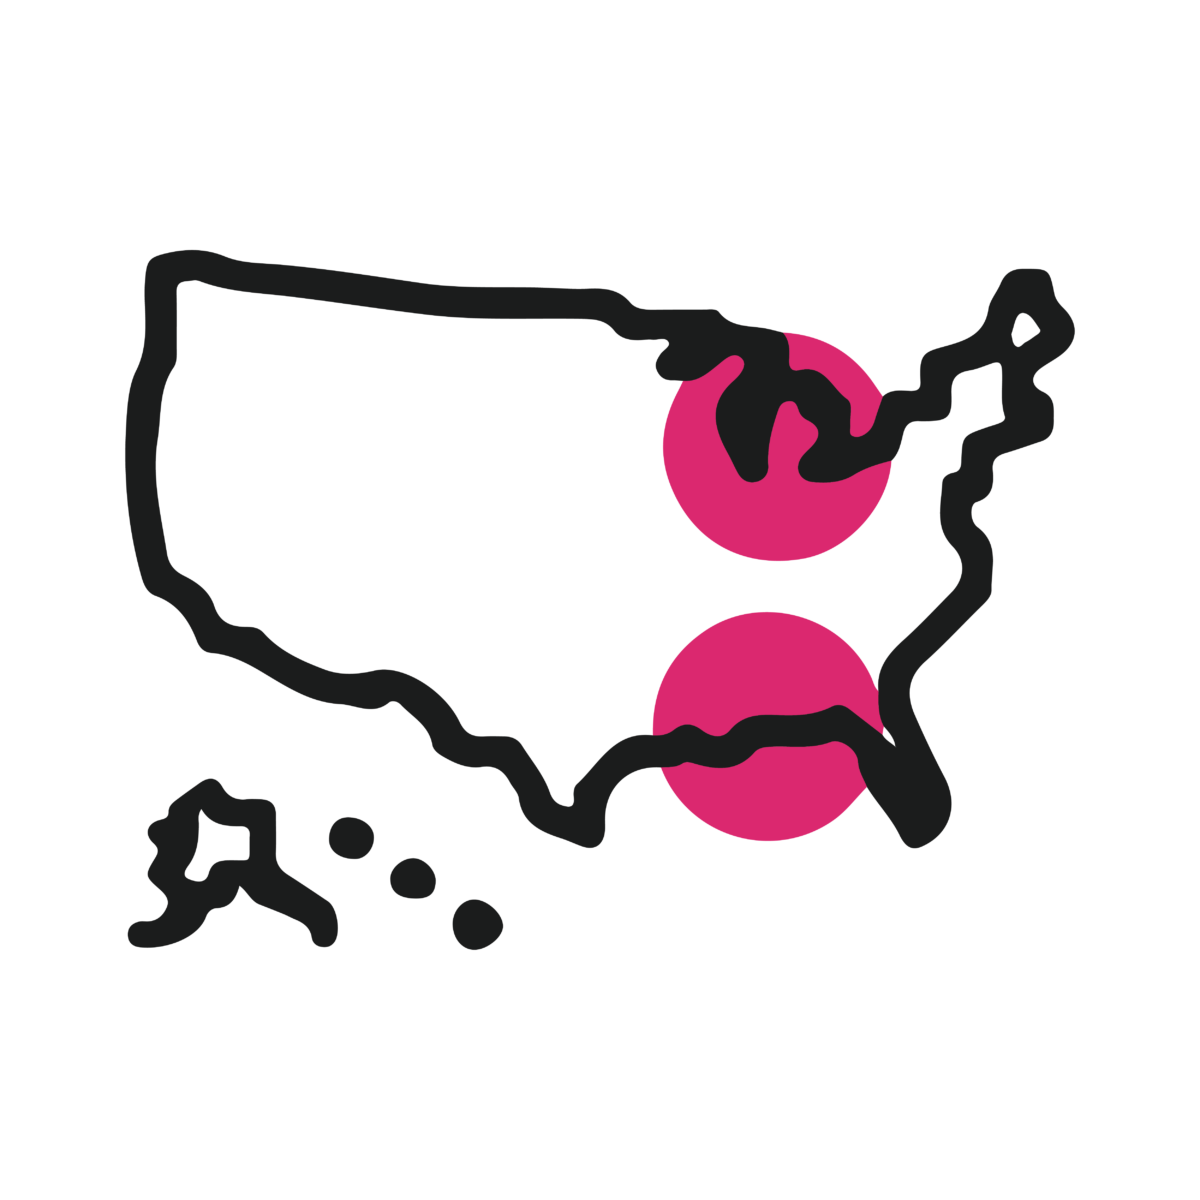 Illustration of a map of the U.S. and territories with pink circles in the midwestern and the southern states